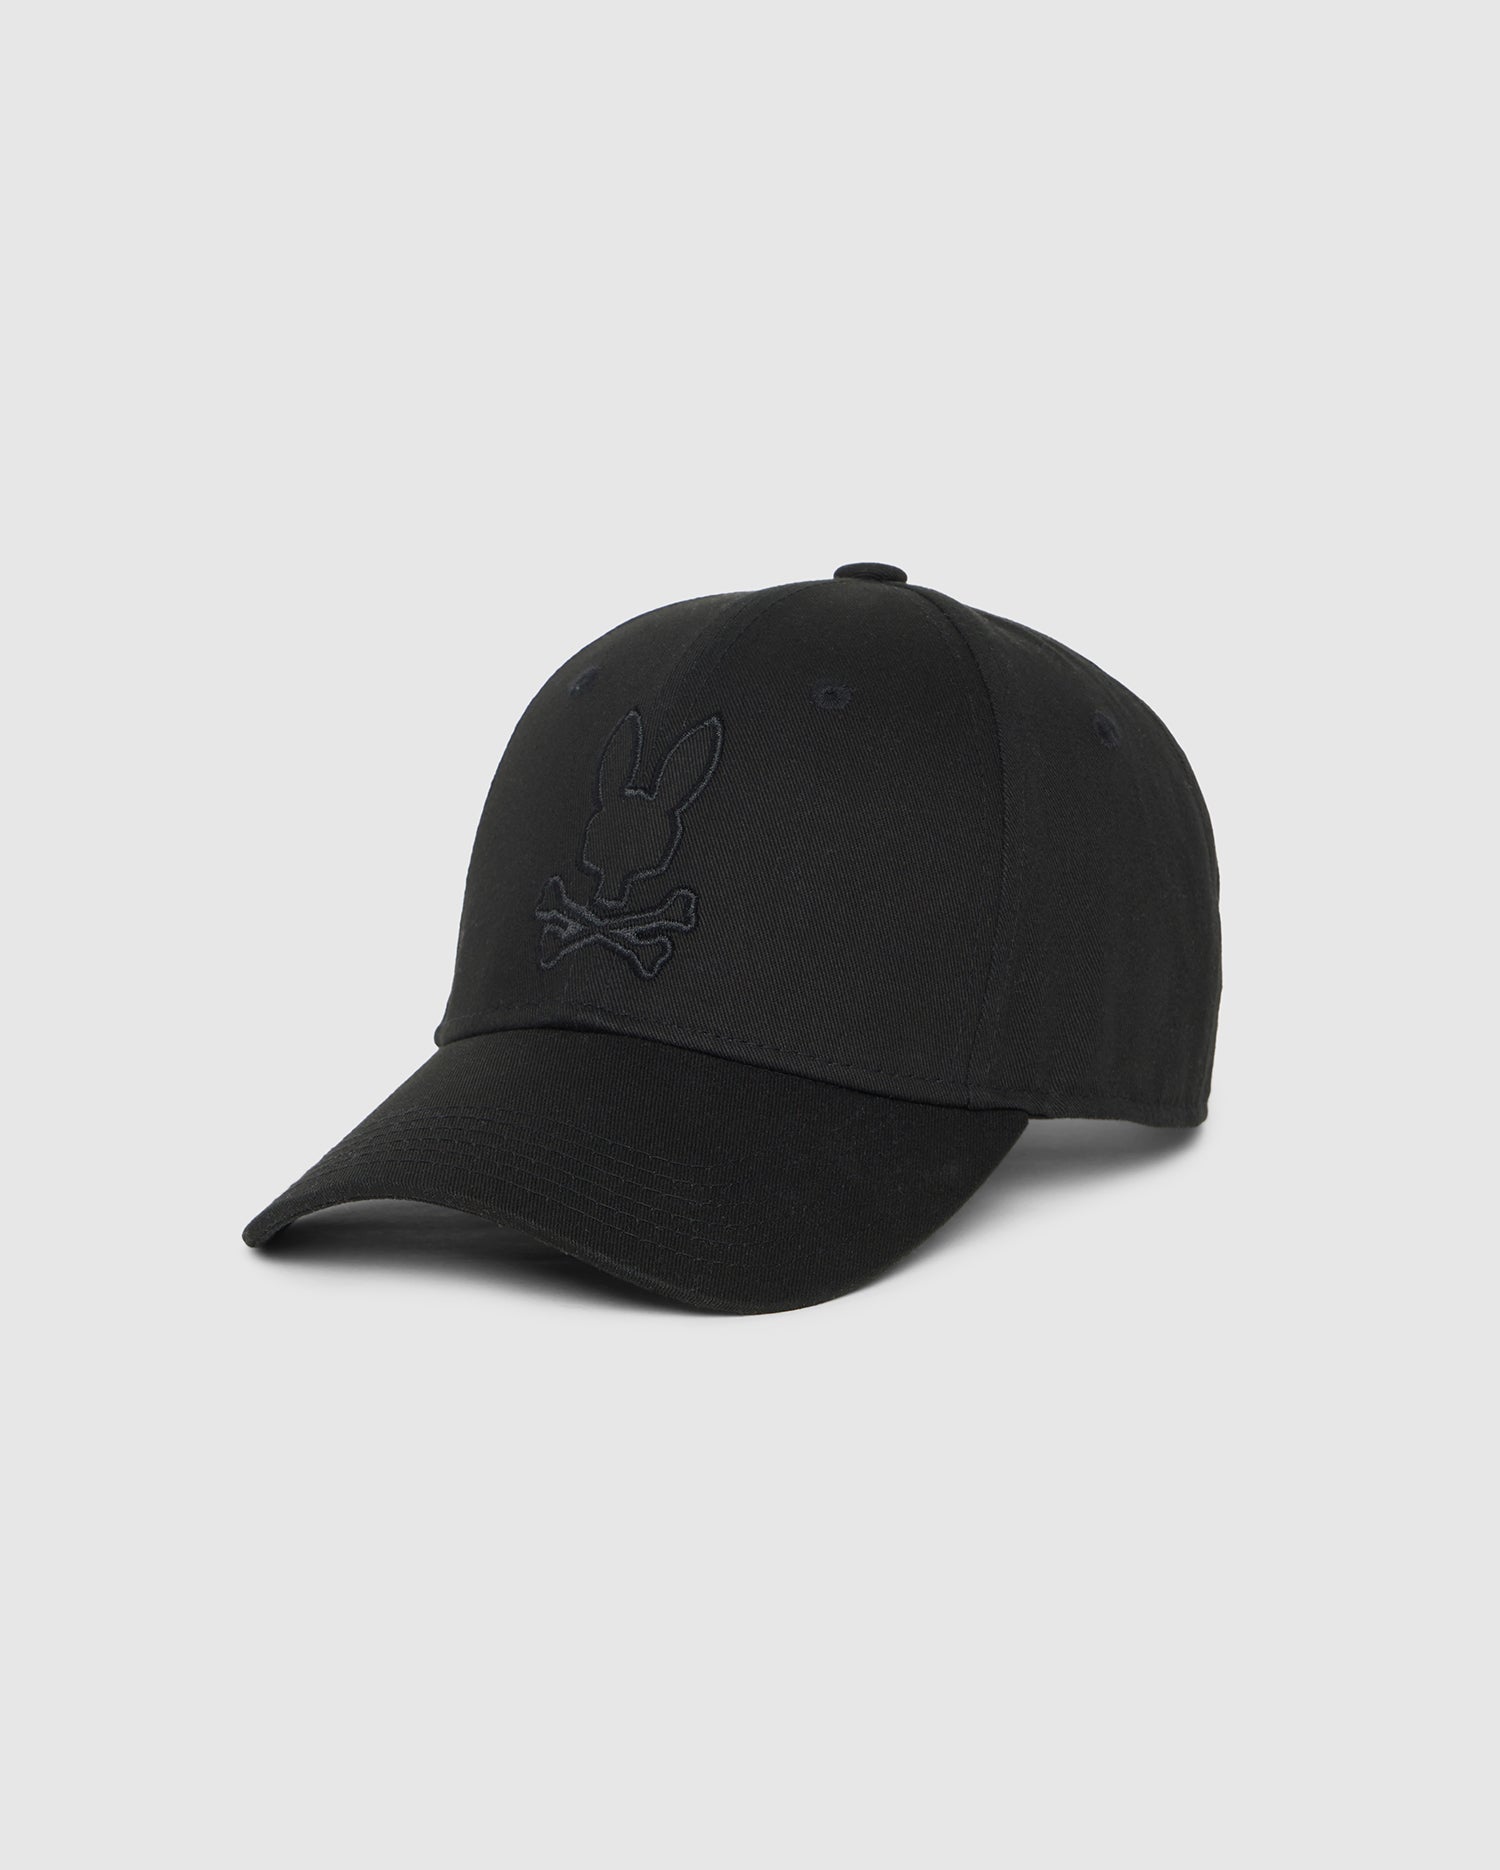 The Psycho Bunny MENS DANBY BASEBALL CAP - B6A360B2HT features a subtle embroidered Bunny head above crossbones on the front. The hat has a curved brim, an adjustable flip clasp, and a six-panel structure with eyelets on each panel.